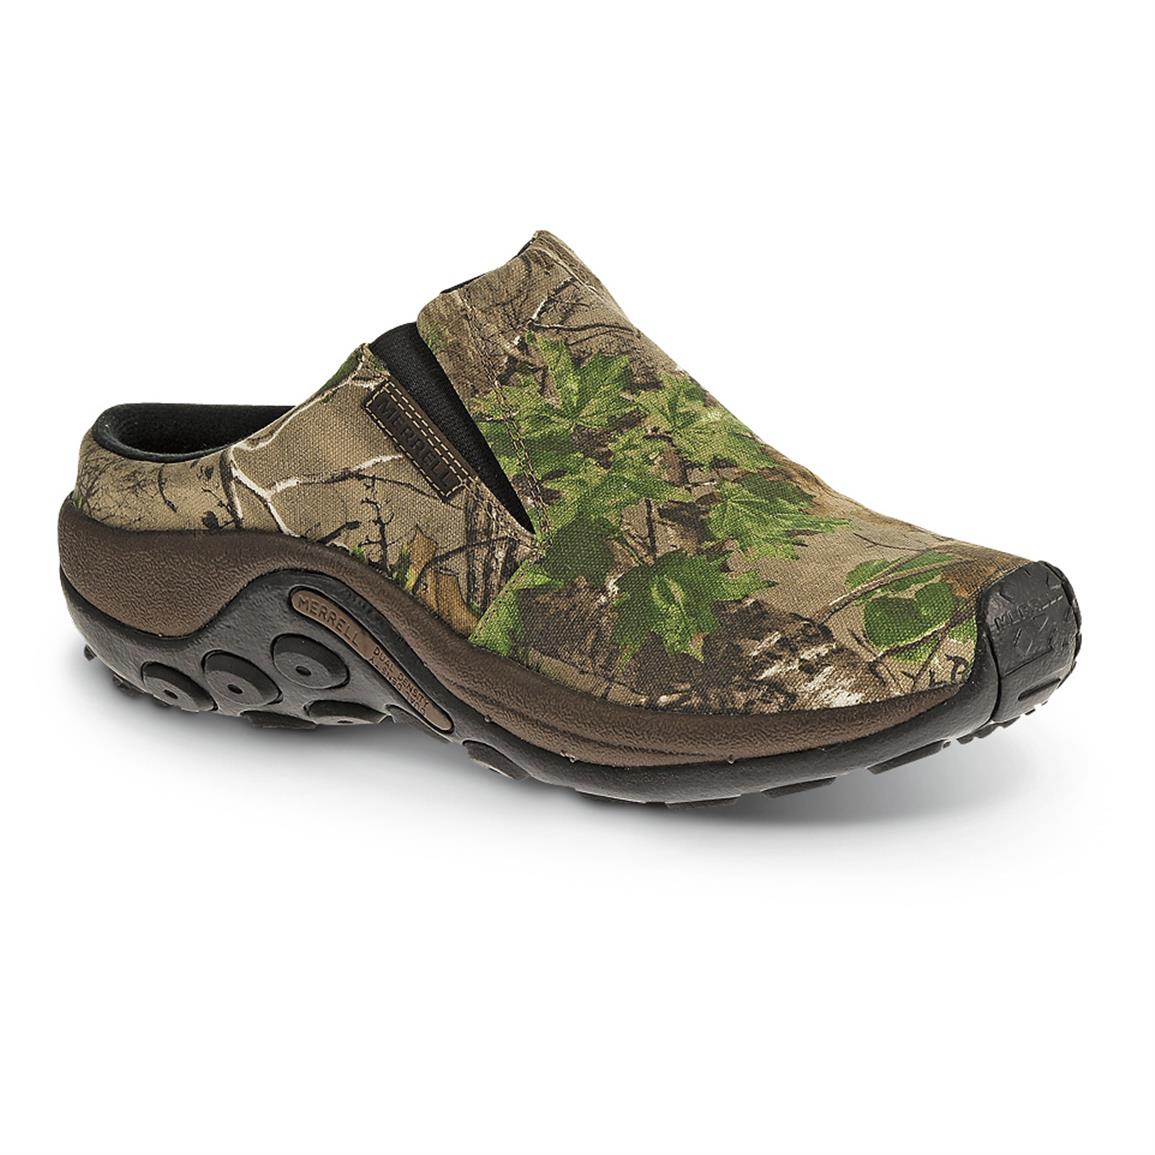 Merrell Camo Jungle Slides - 593902, Casual Shoes at Sportsman's Guide